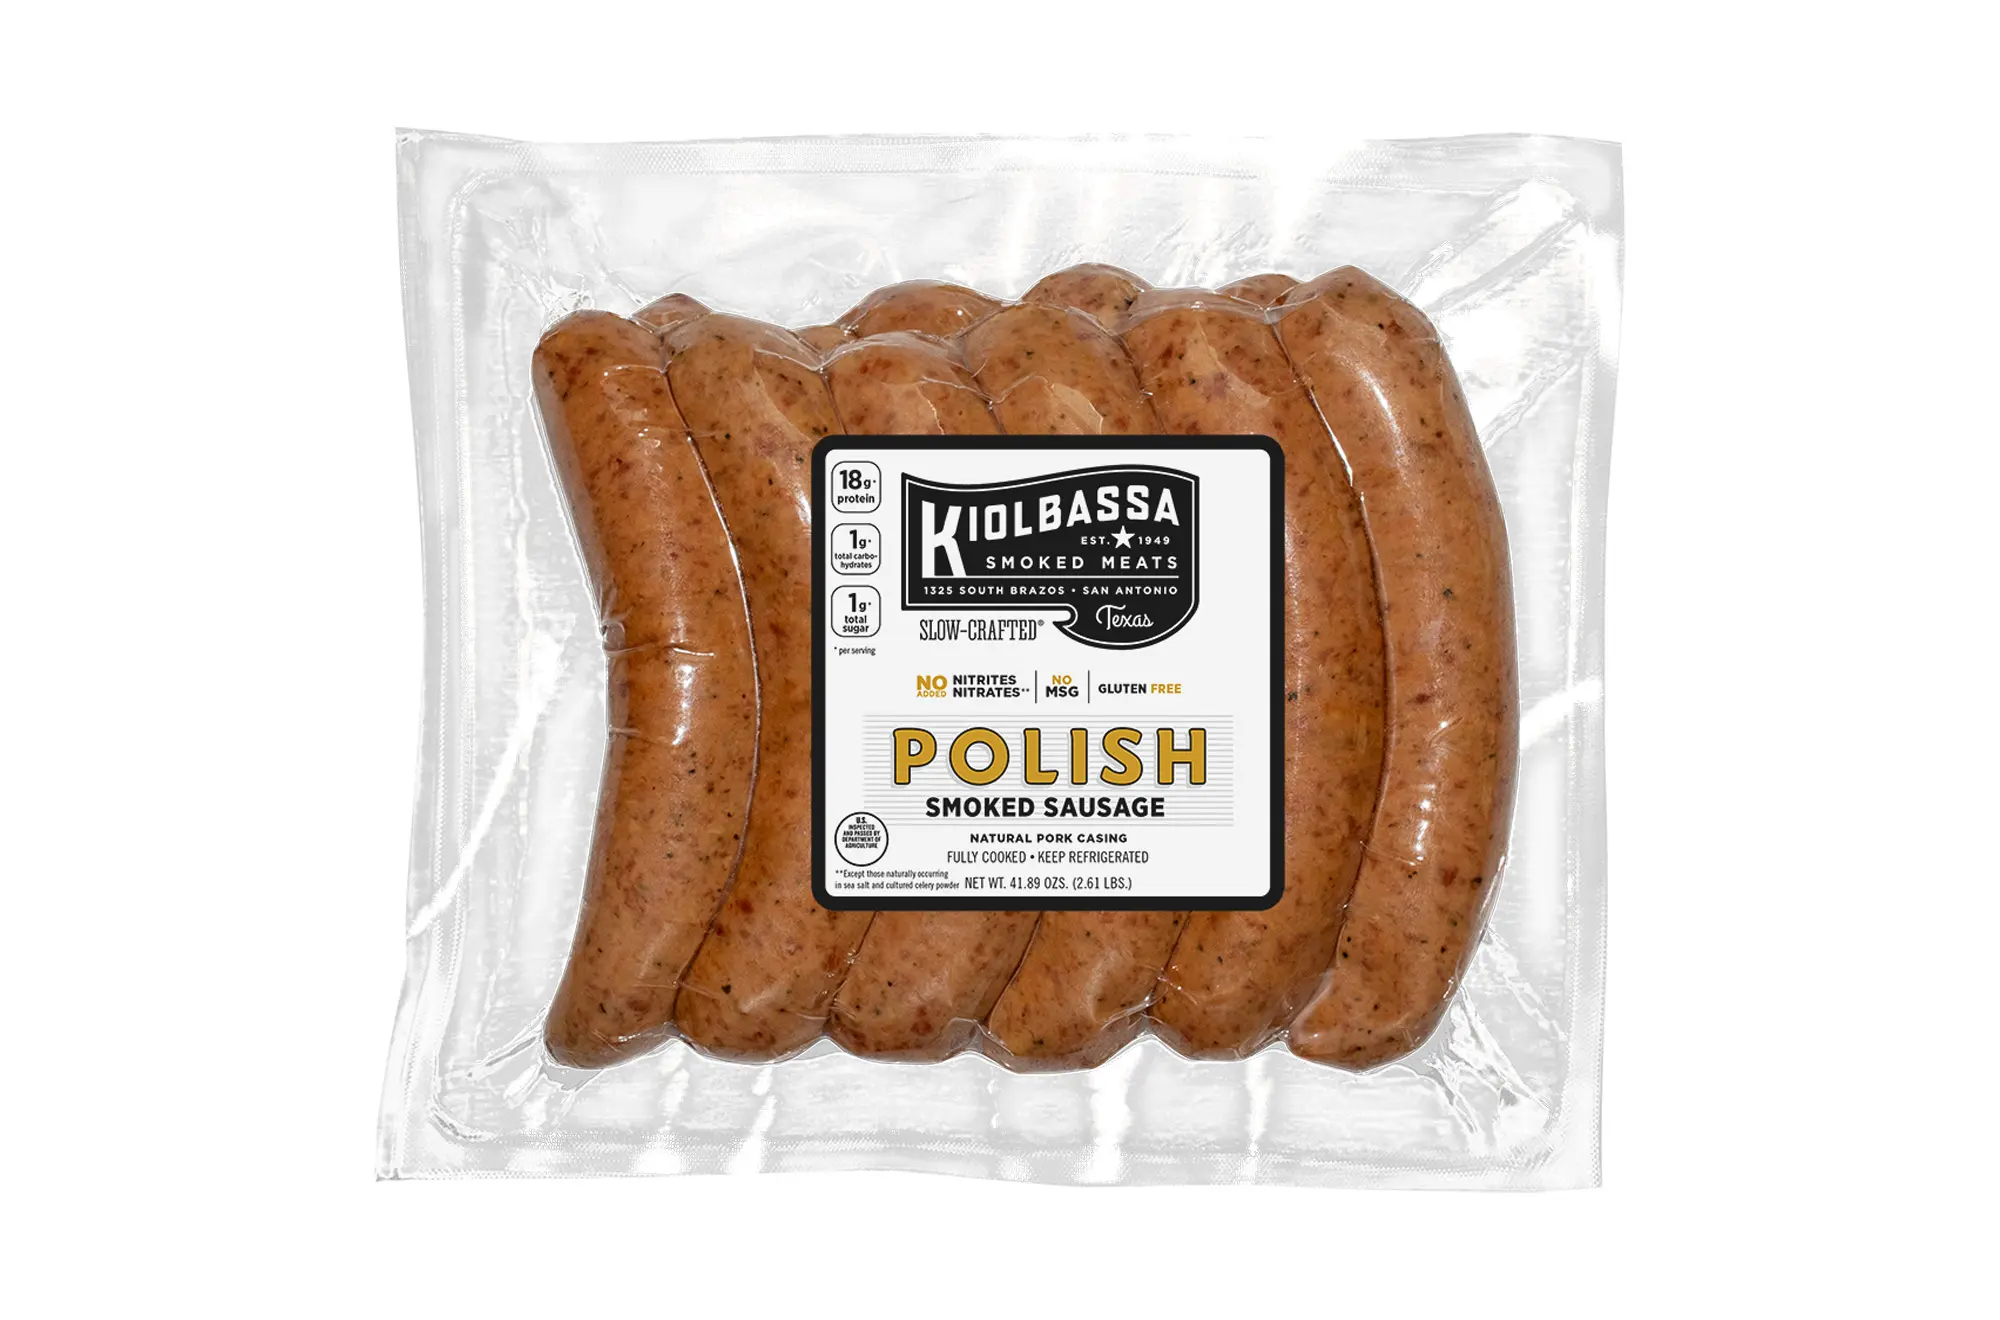 is smoked sausage gluten free - Is Mattessons smoked sausage gluten free